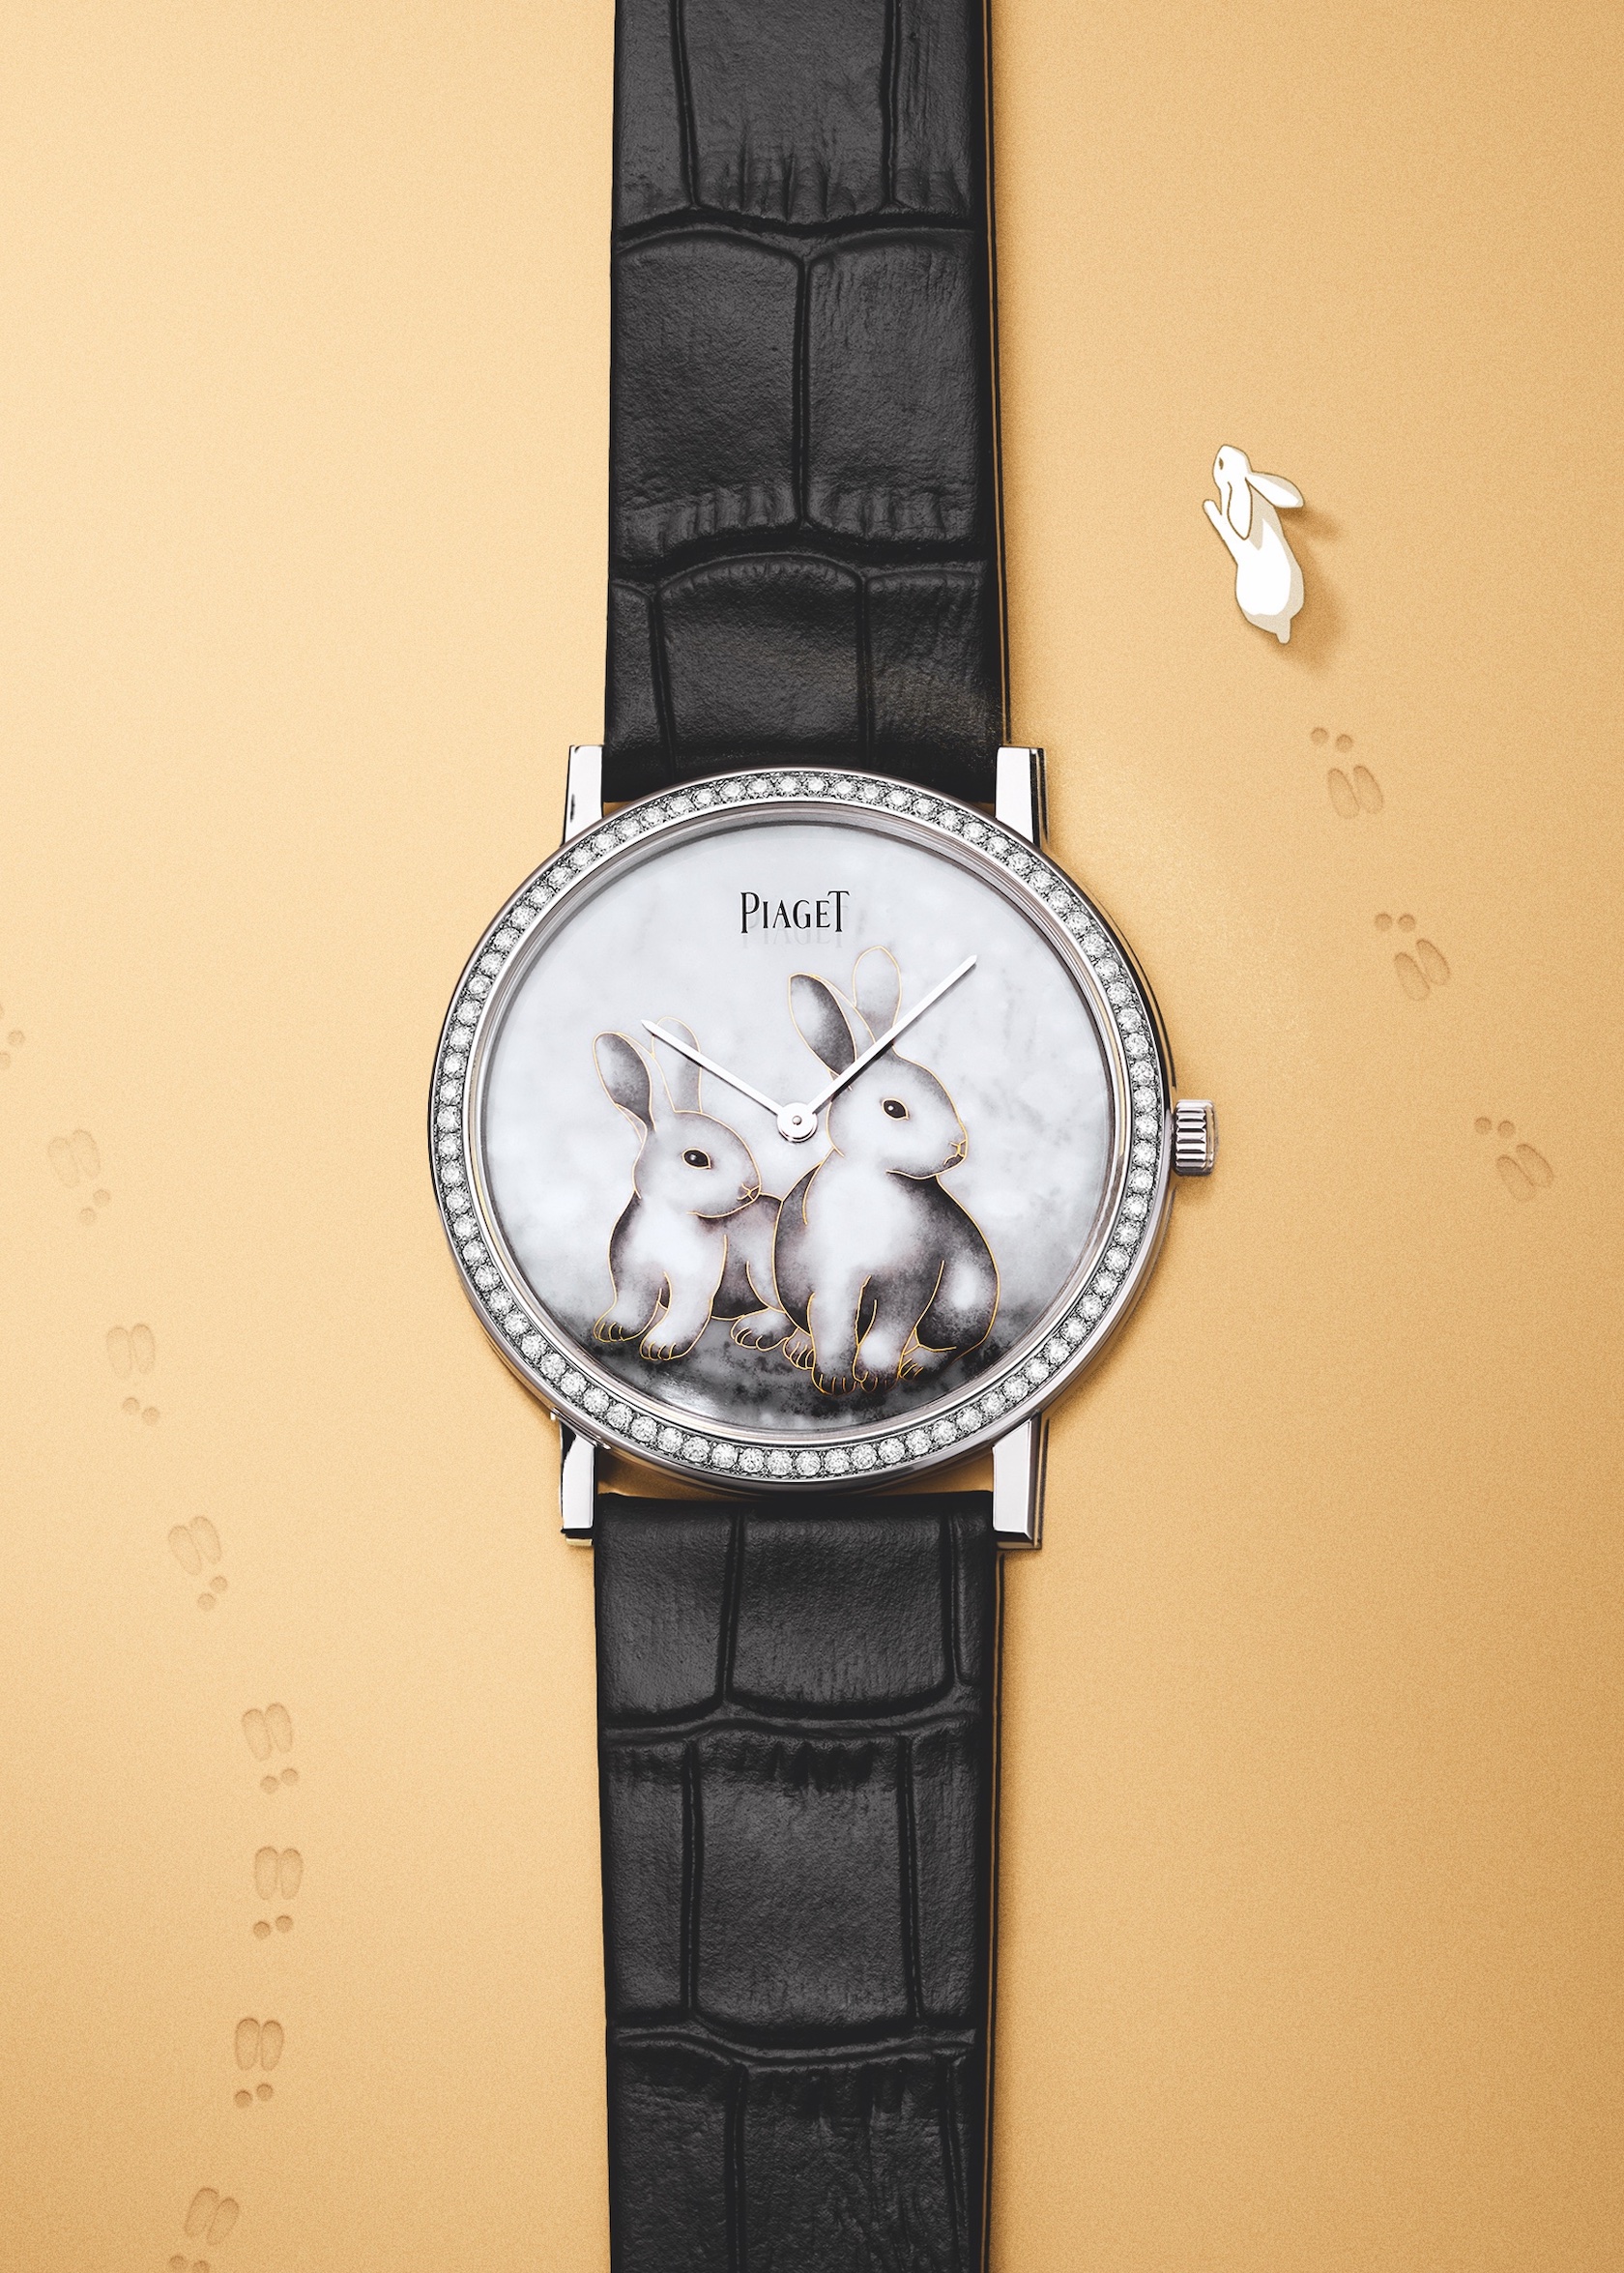 Piaget Altiplano Year of the Rabbit watch